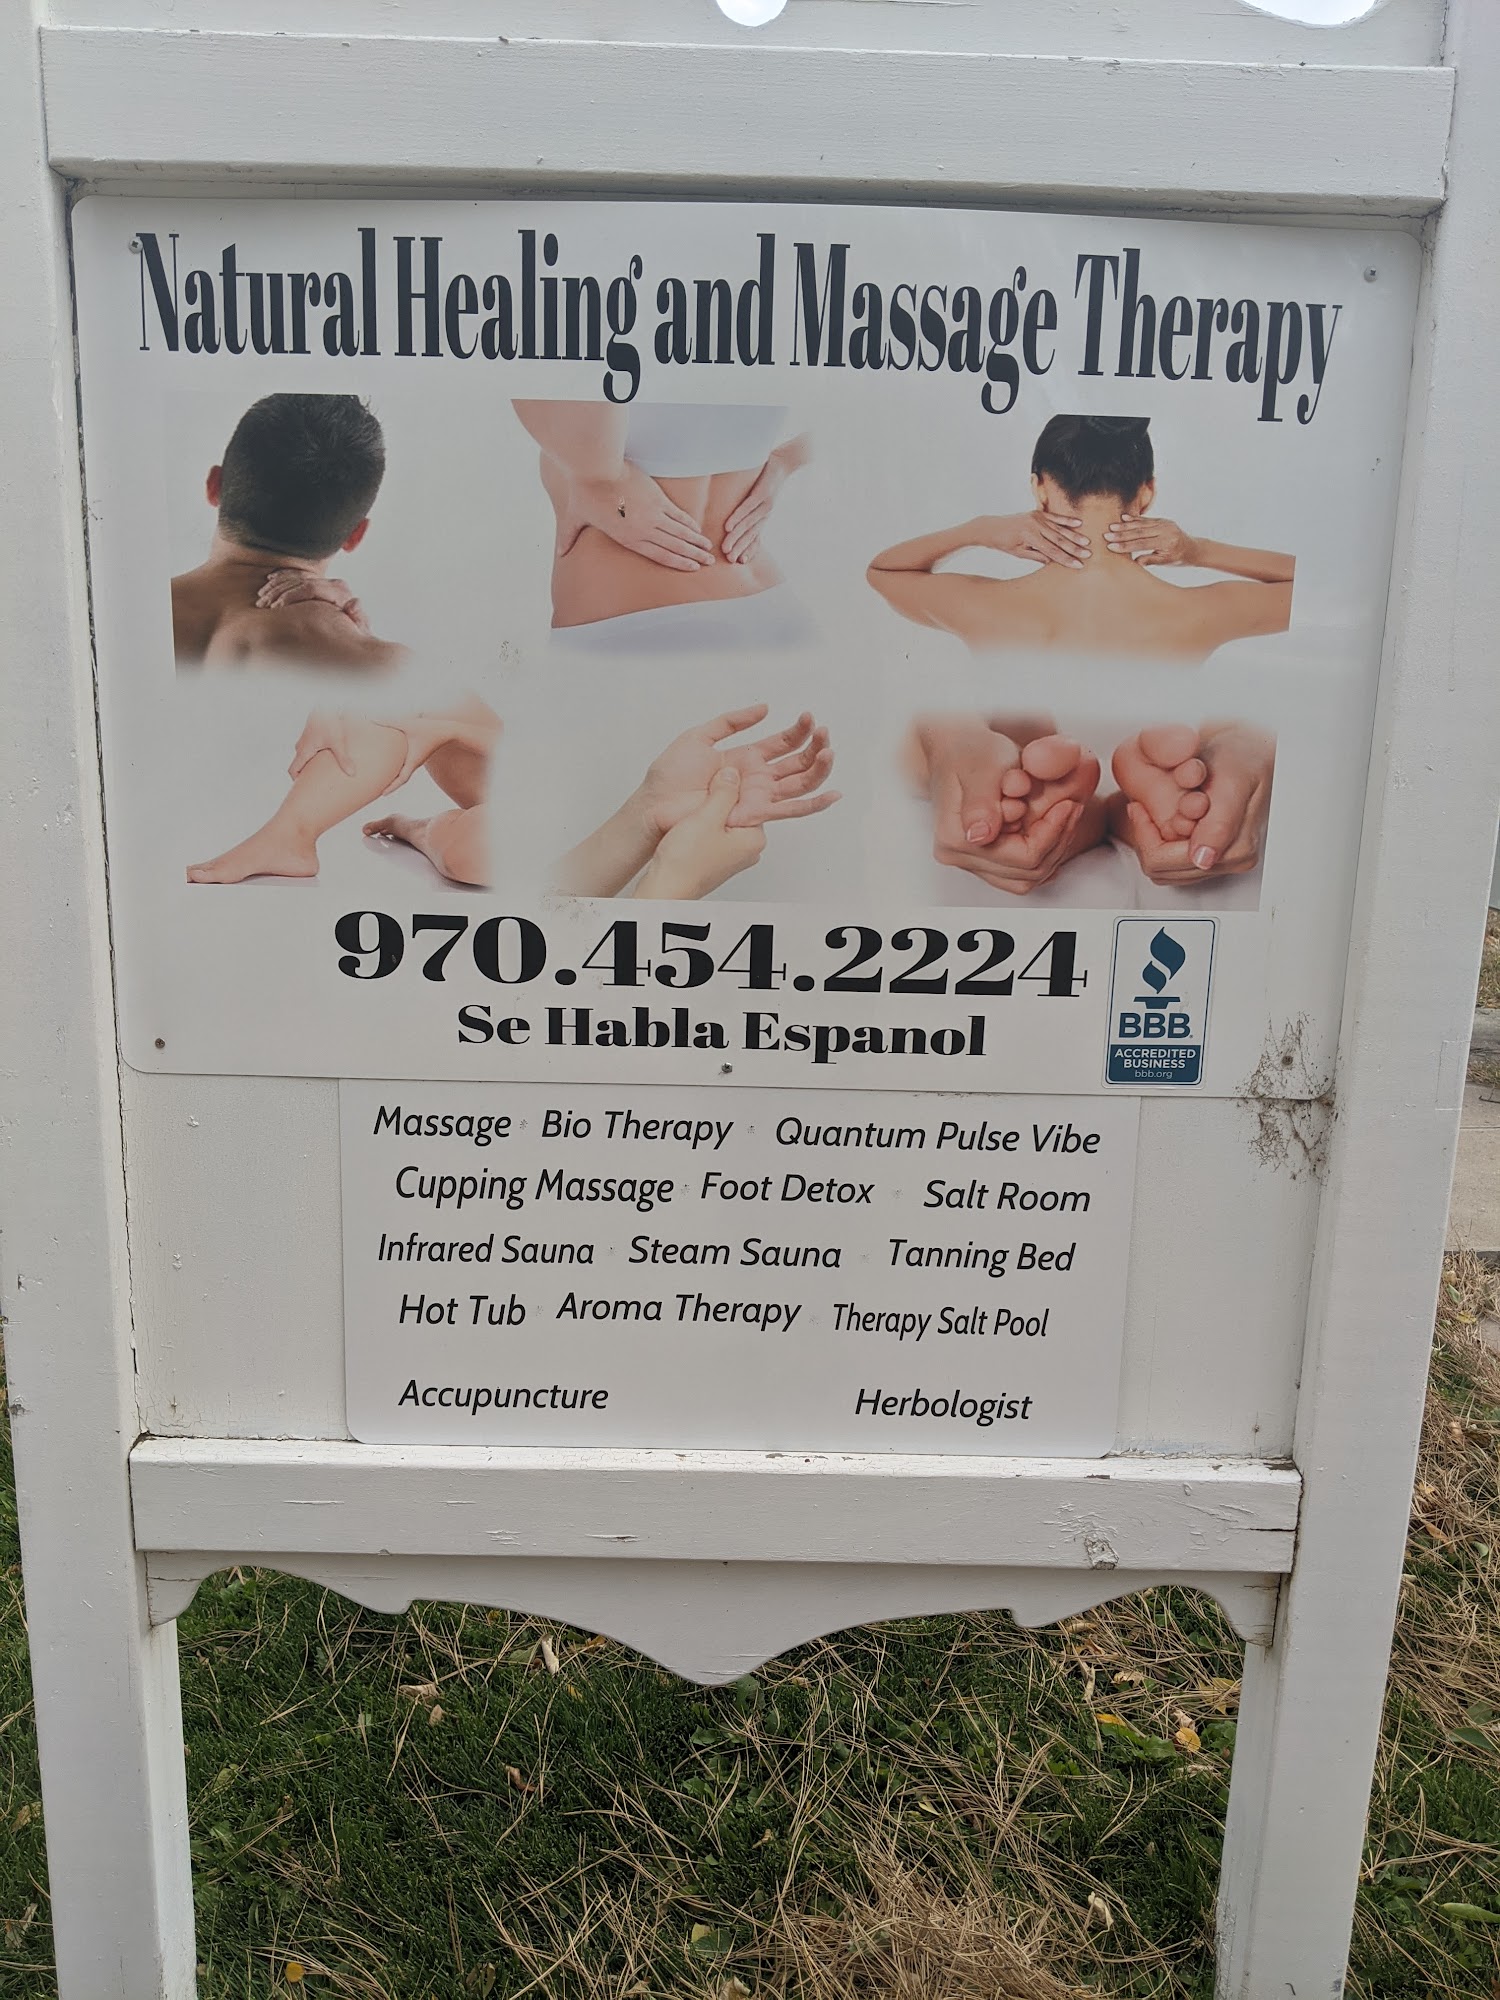 Natural Healing and Massage Therapy 123 Elm Ave, Eaton Colorado 80615